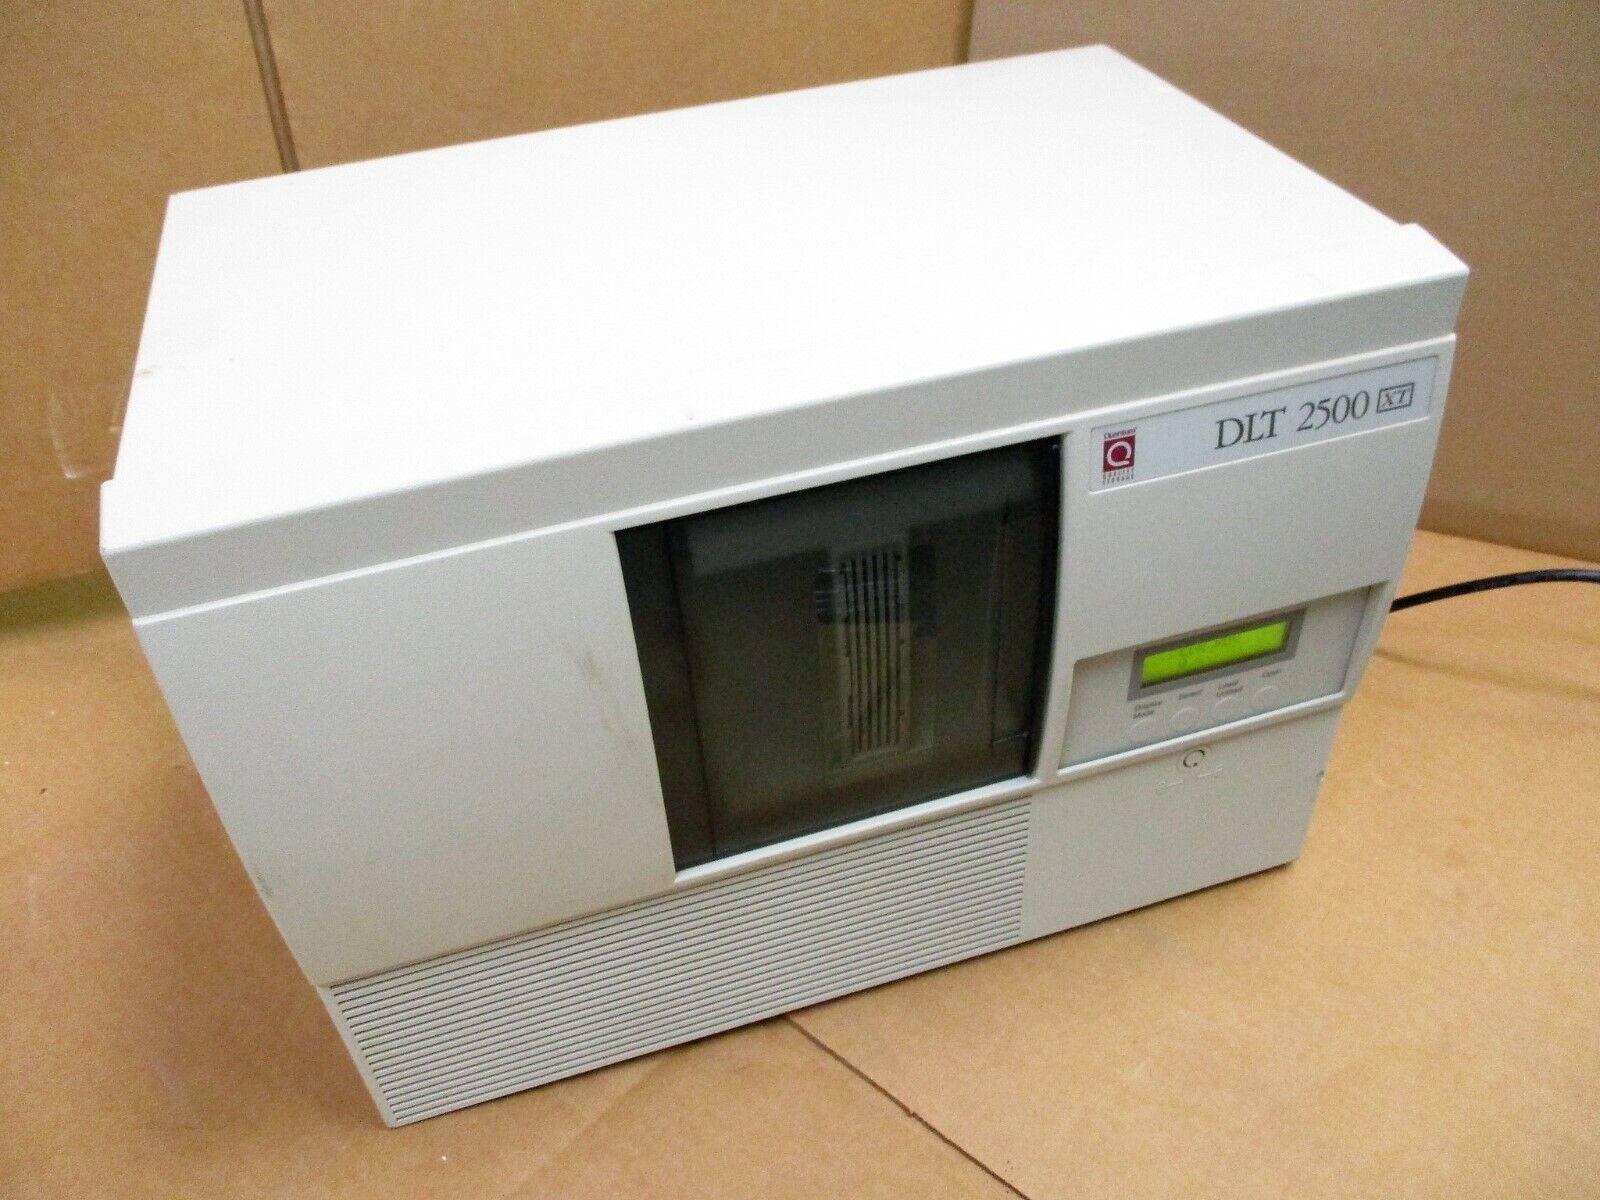 Primary image for Quantum DLT 2500 XT 5 Tape Library Tape Drive